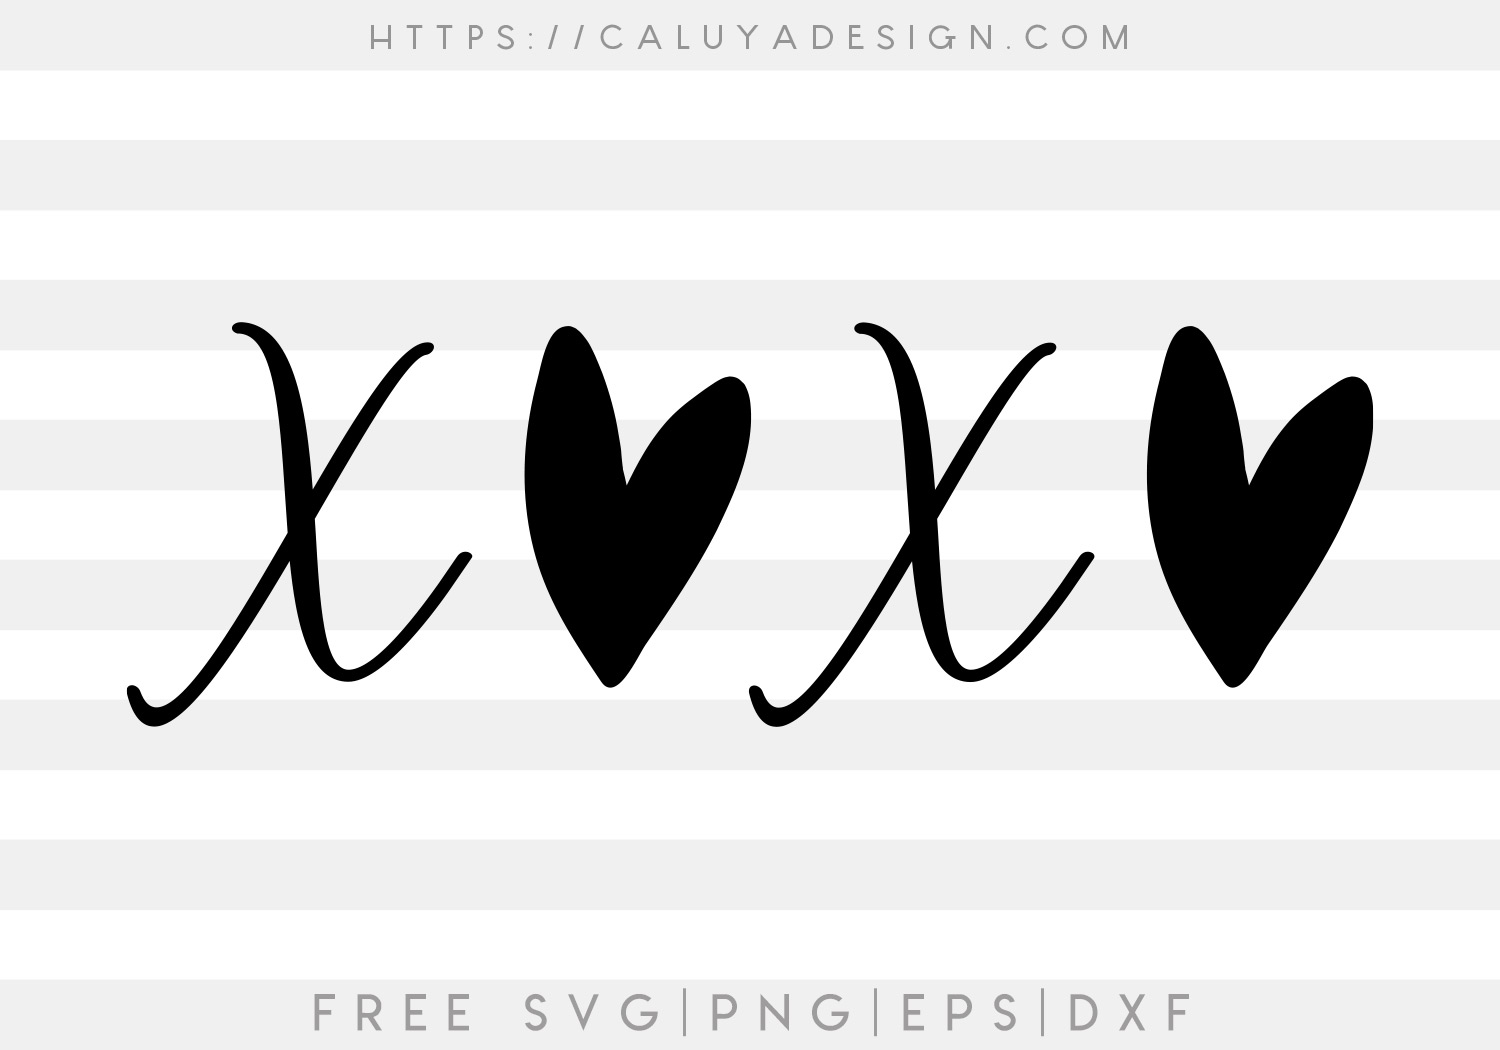 Free XOXO SVG, PNG, EPS & DXF by Caluya Design